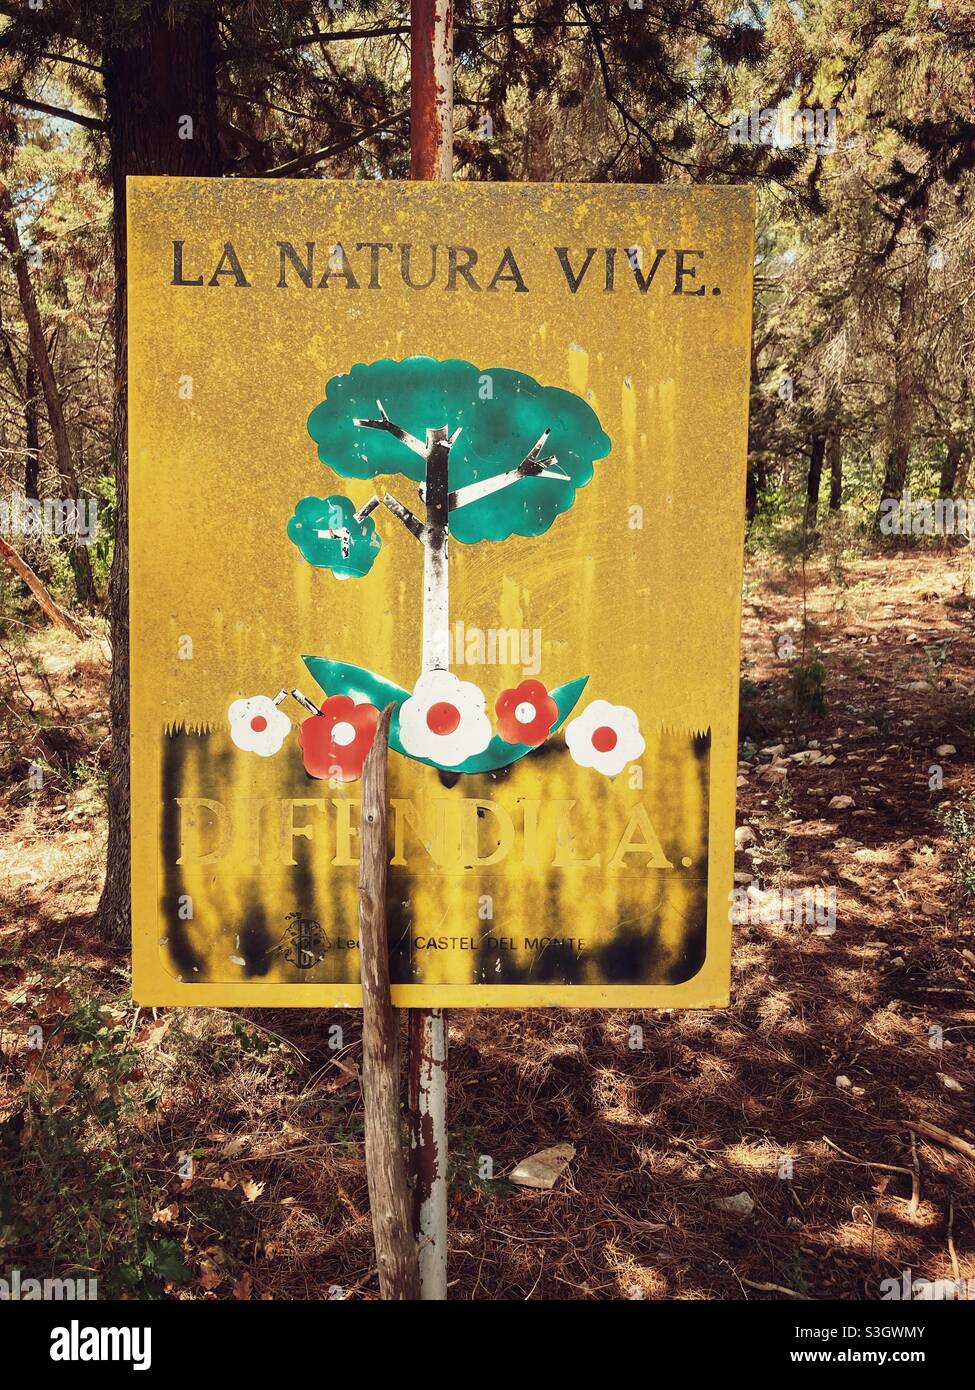 A sign for the preservation of Nature in Italian: La natura vive (Nature lives) Stock Photo